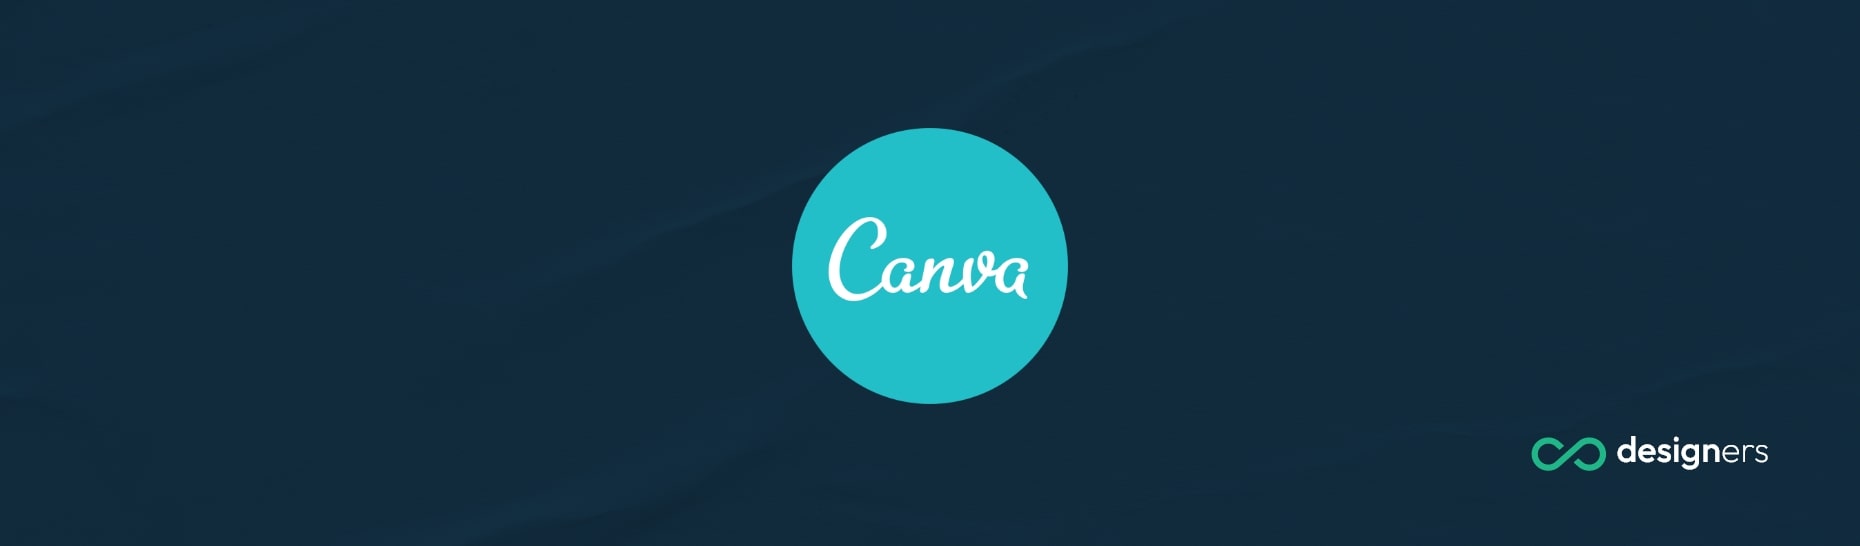 How Do I Add a Gradient Background in Canva? 